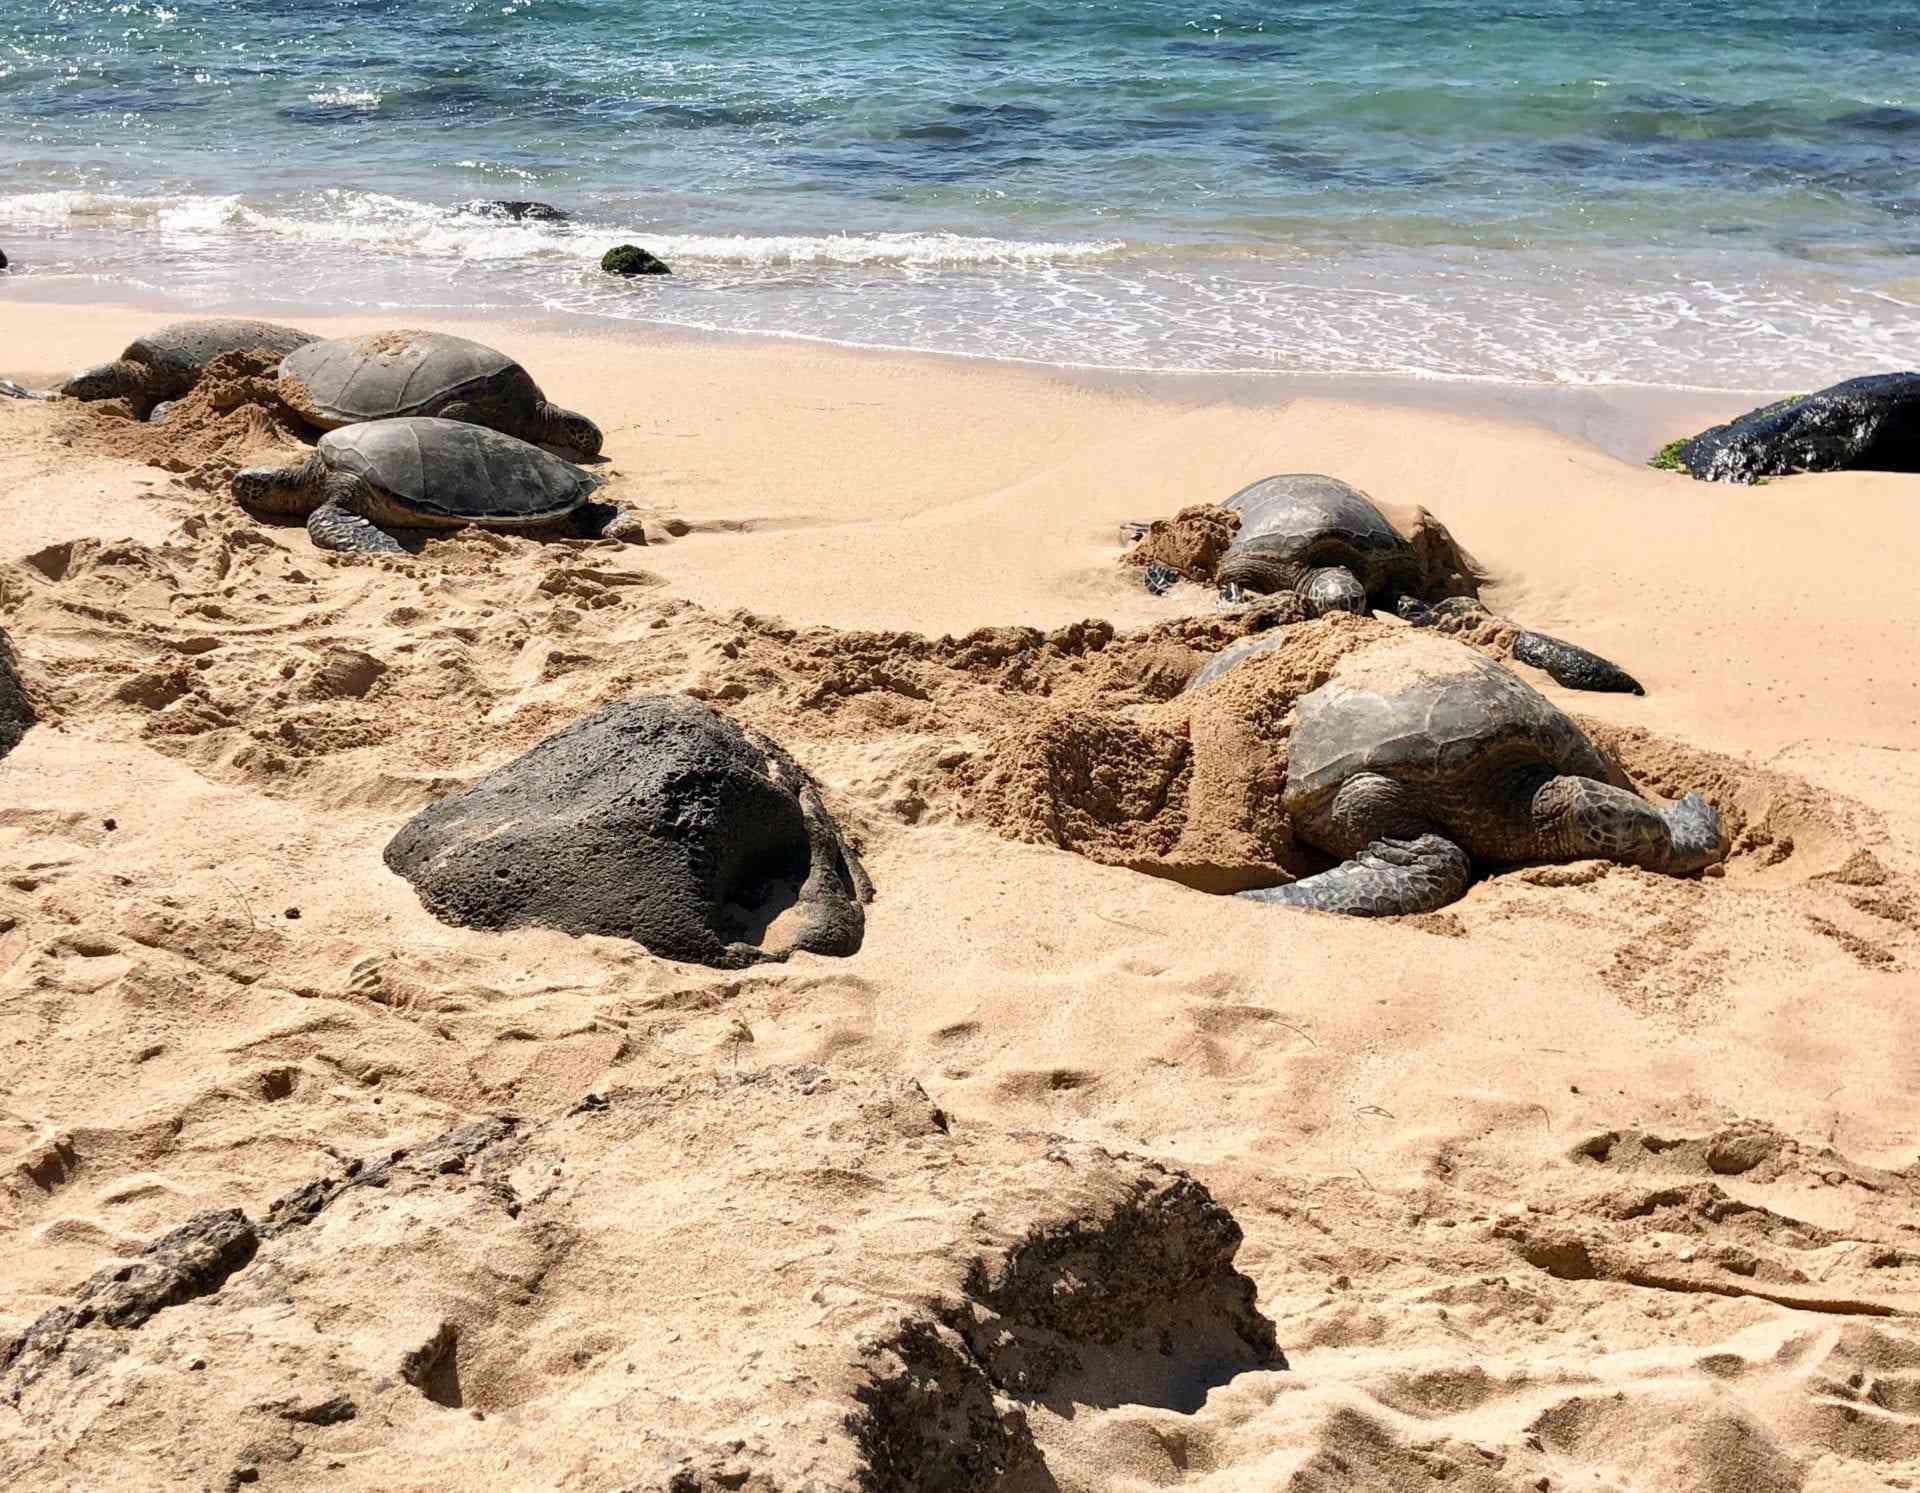 a group of turtles on the shore